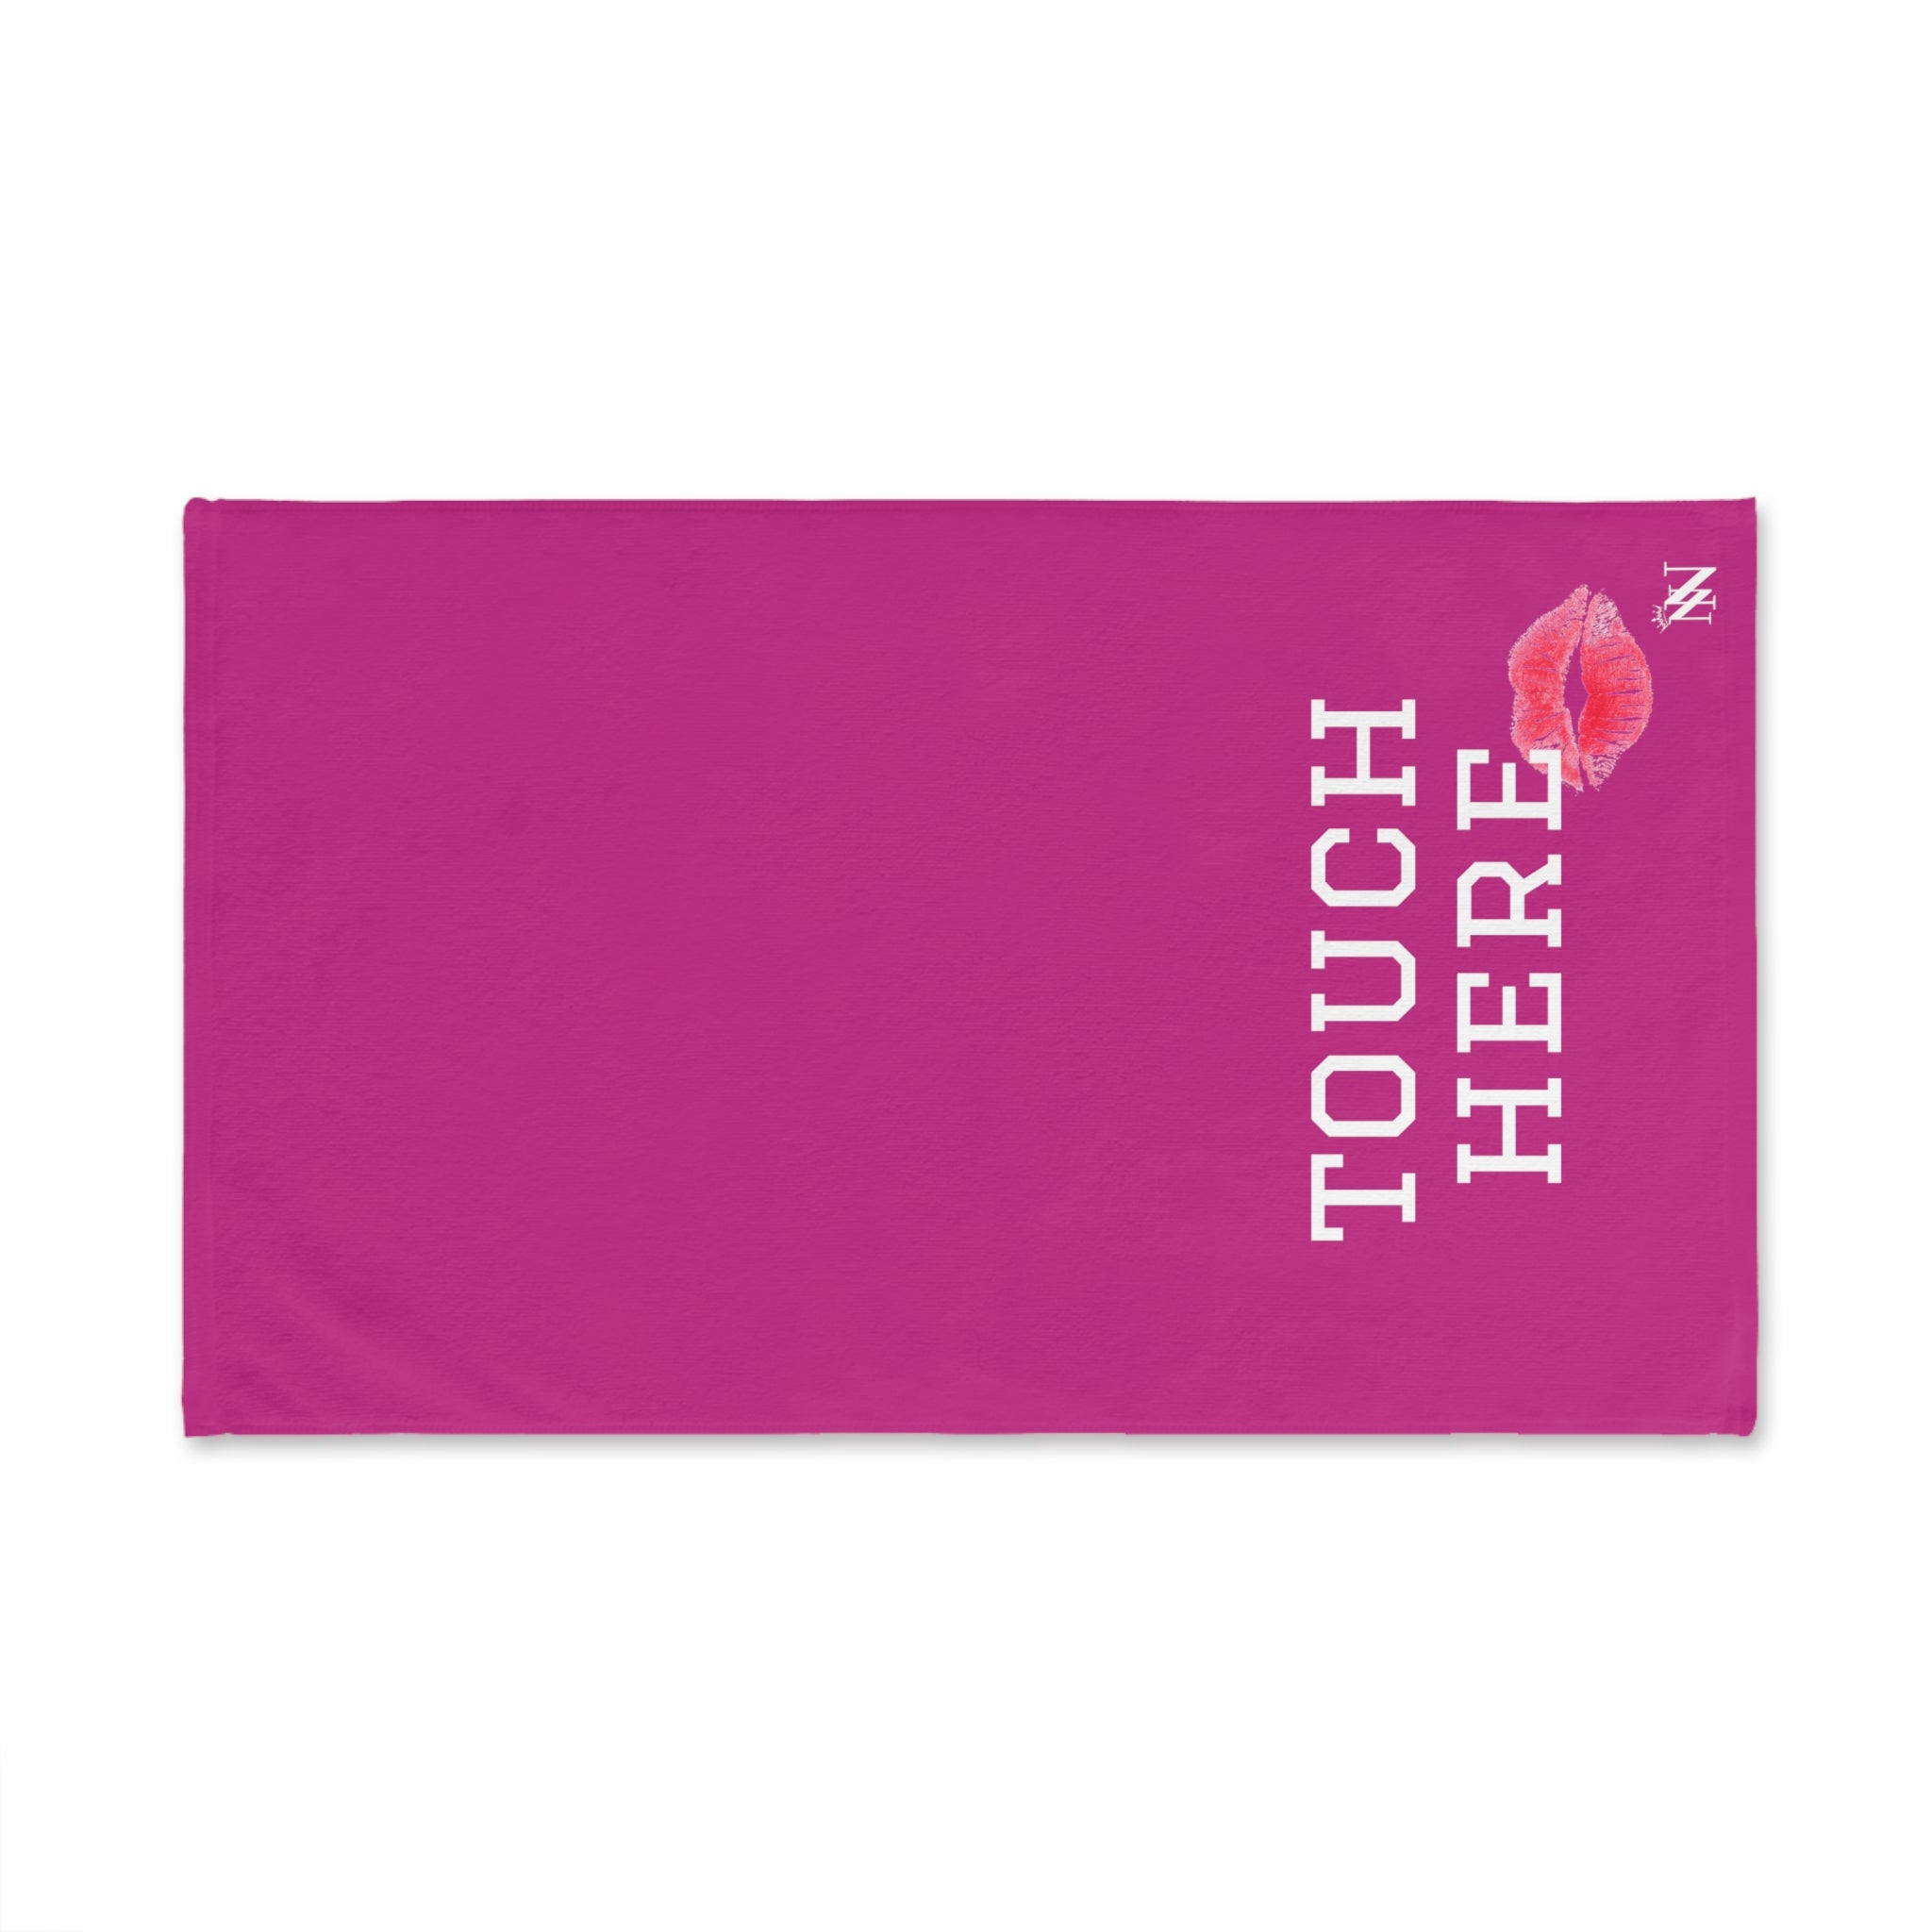 Touch Here Kiss Lip Fuscia | Funny Gifts for Men - Gifts for Him - Birthday Gifts for Men, Him, Husband, Boyfriend, New Couple Gifts, Fathers & Valentines Day Gifts, Hand Towels NECTAR NAPKINS